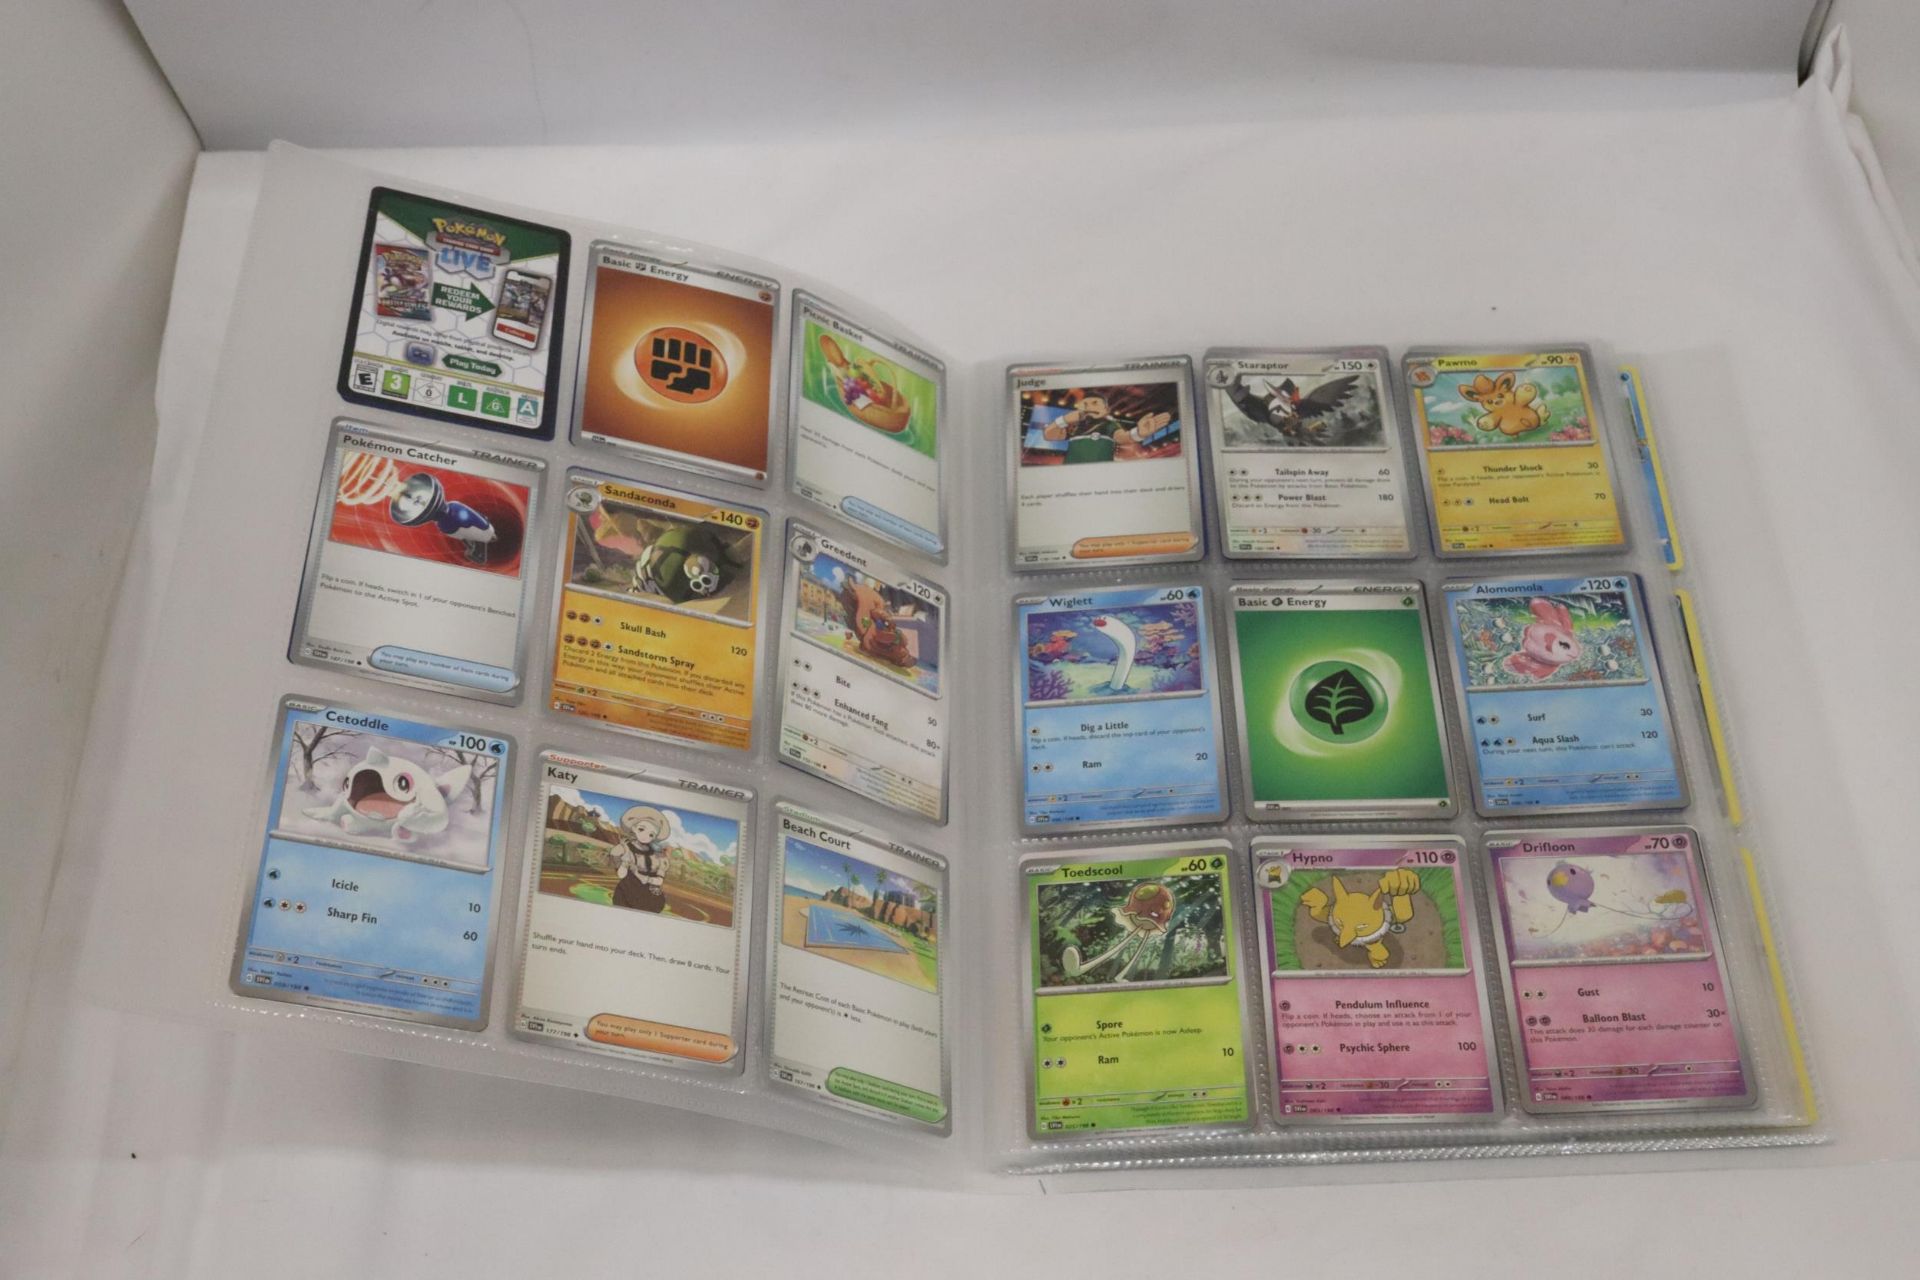 A PROTECTIVE TRADING CARD BINDER FULL OF POKEMON CARDS, INCLUDING SHINIES - Image 4 of 5